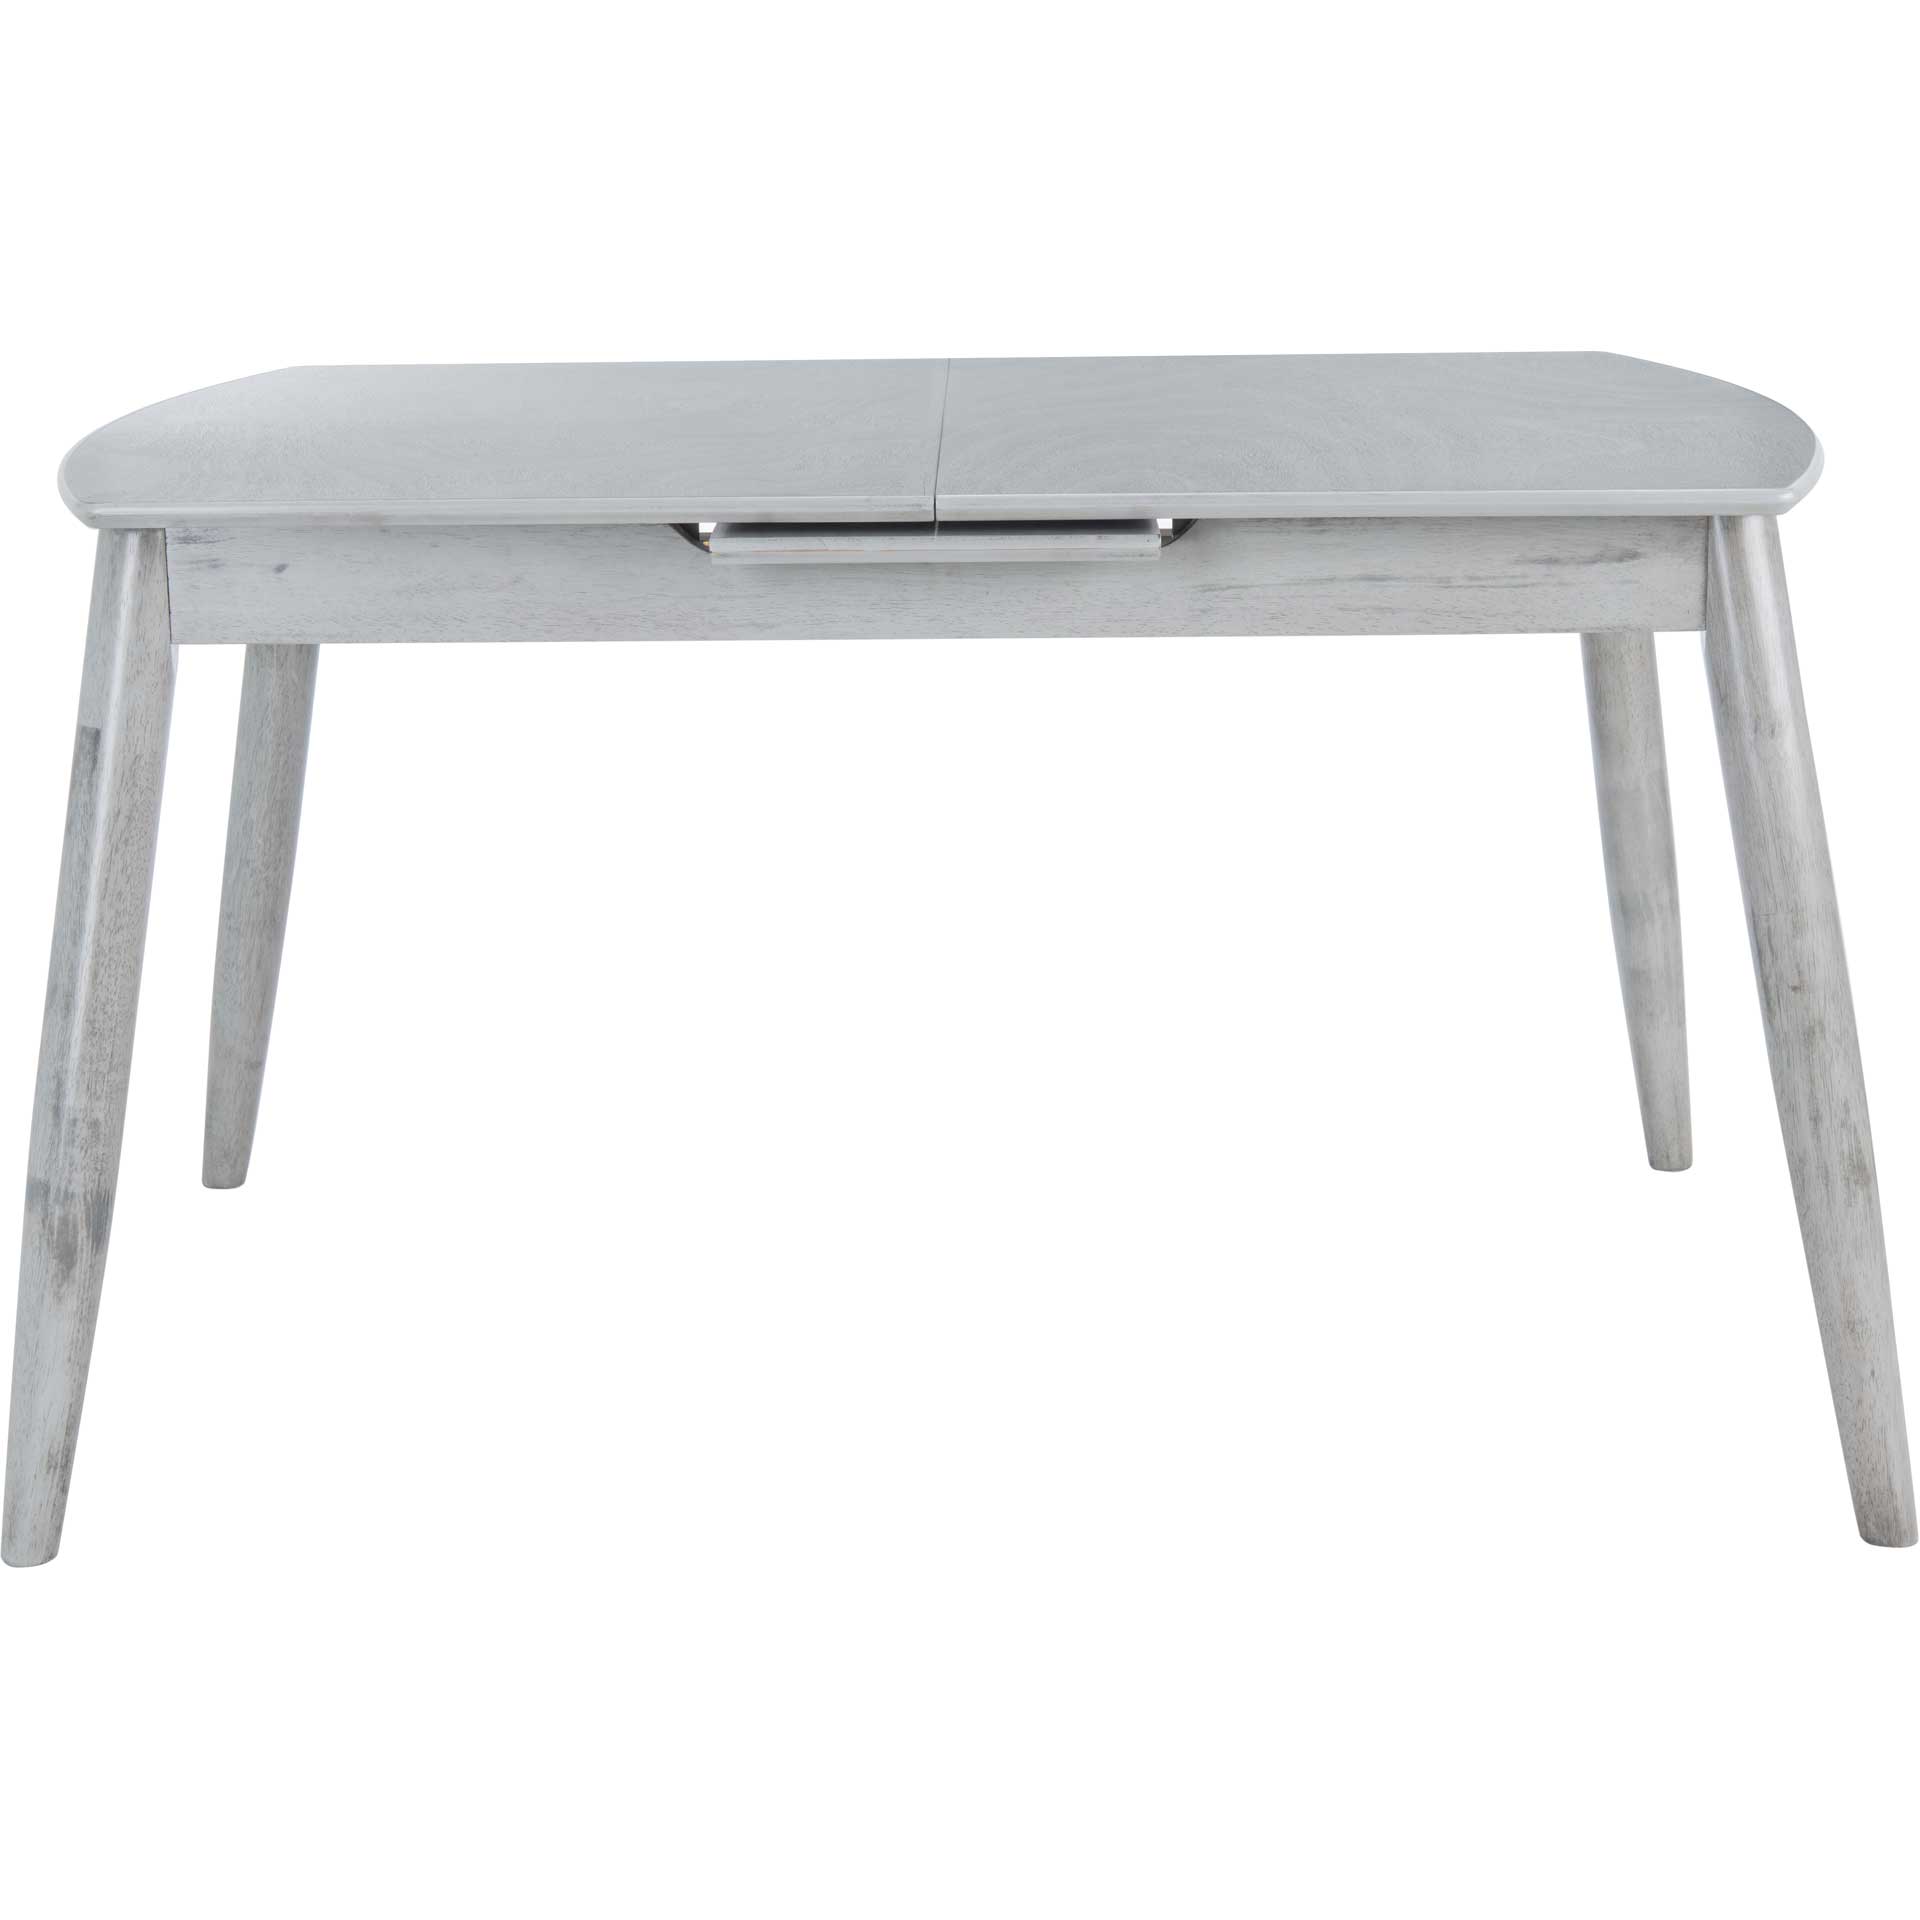 Kylie Auto Mechanism Extension Dining Table Dark Gray